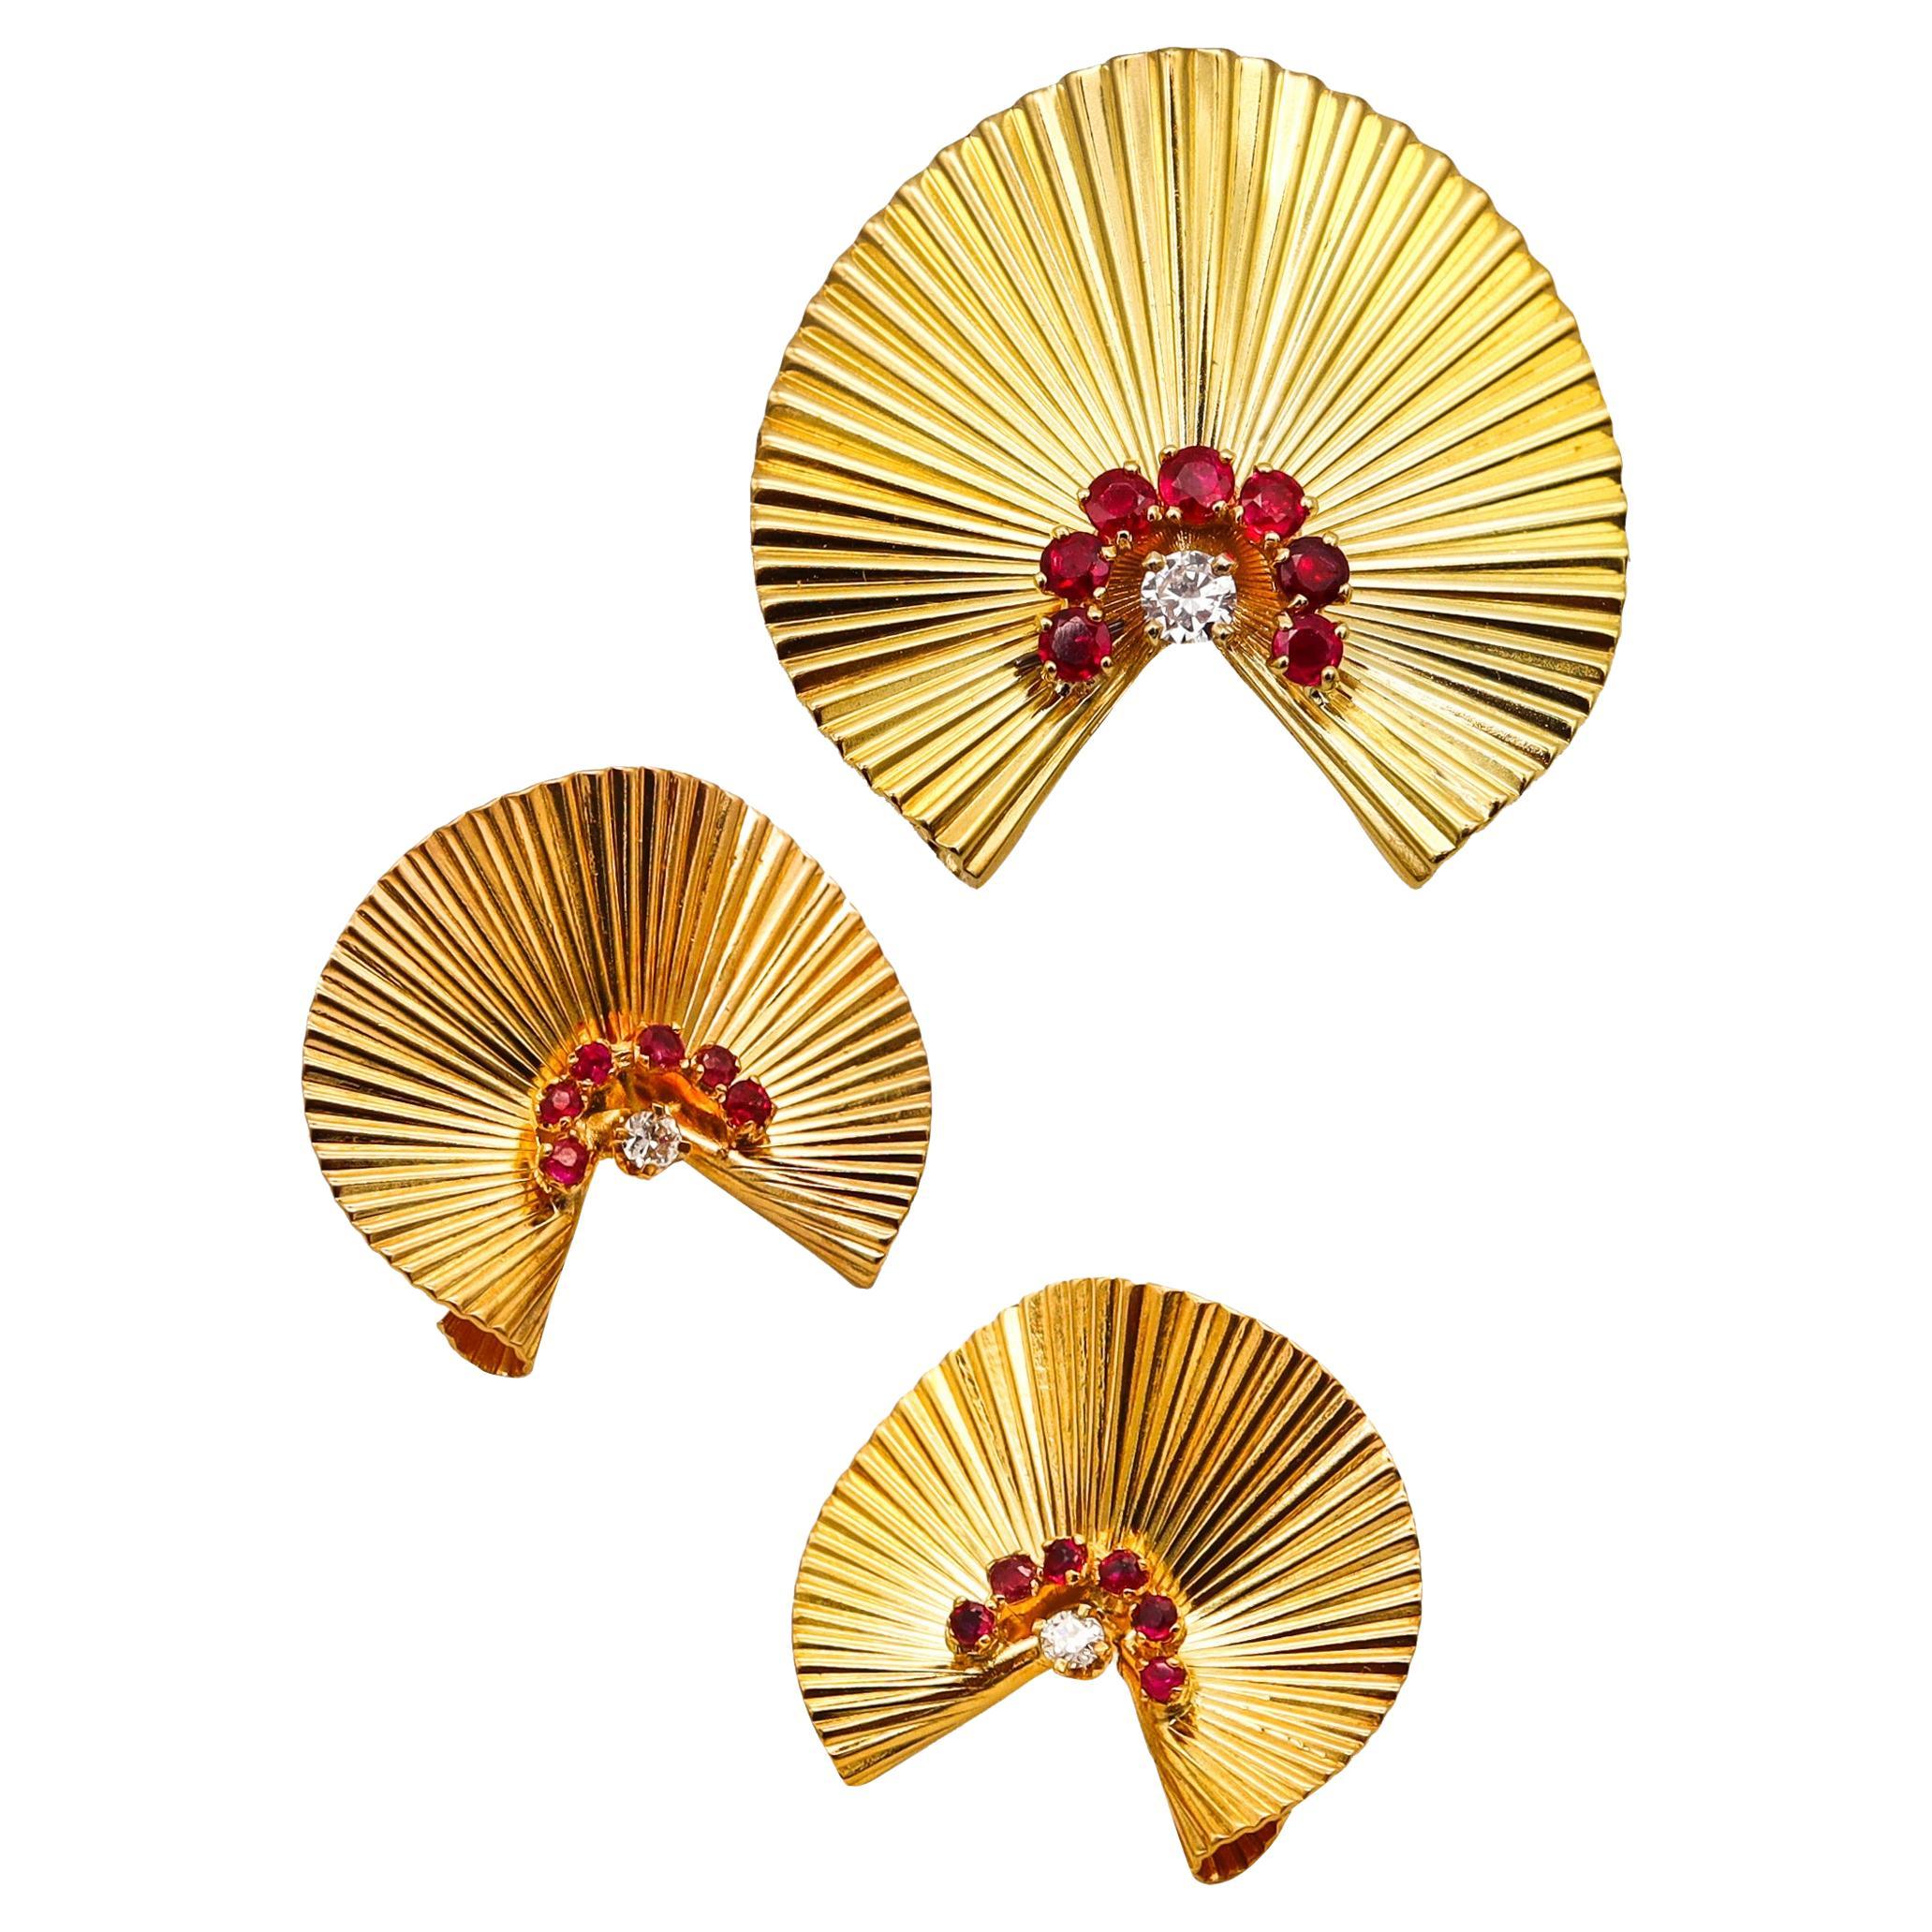 George Schuler 1950 Earrings & Brooch Set 18kt Gold with 1.47 Cts Diamond Rubies